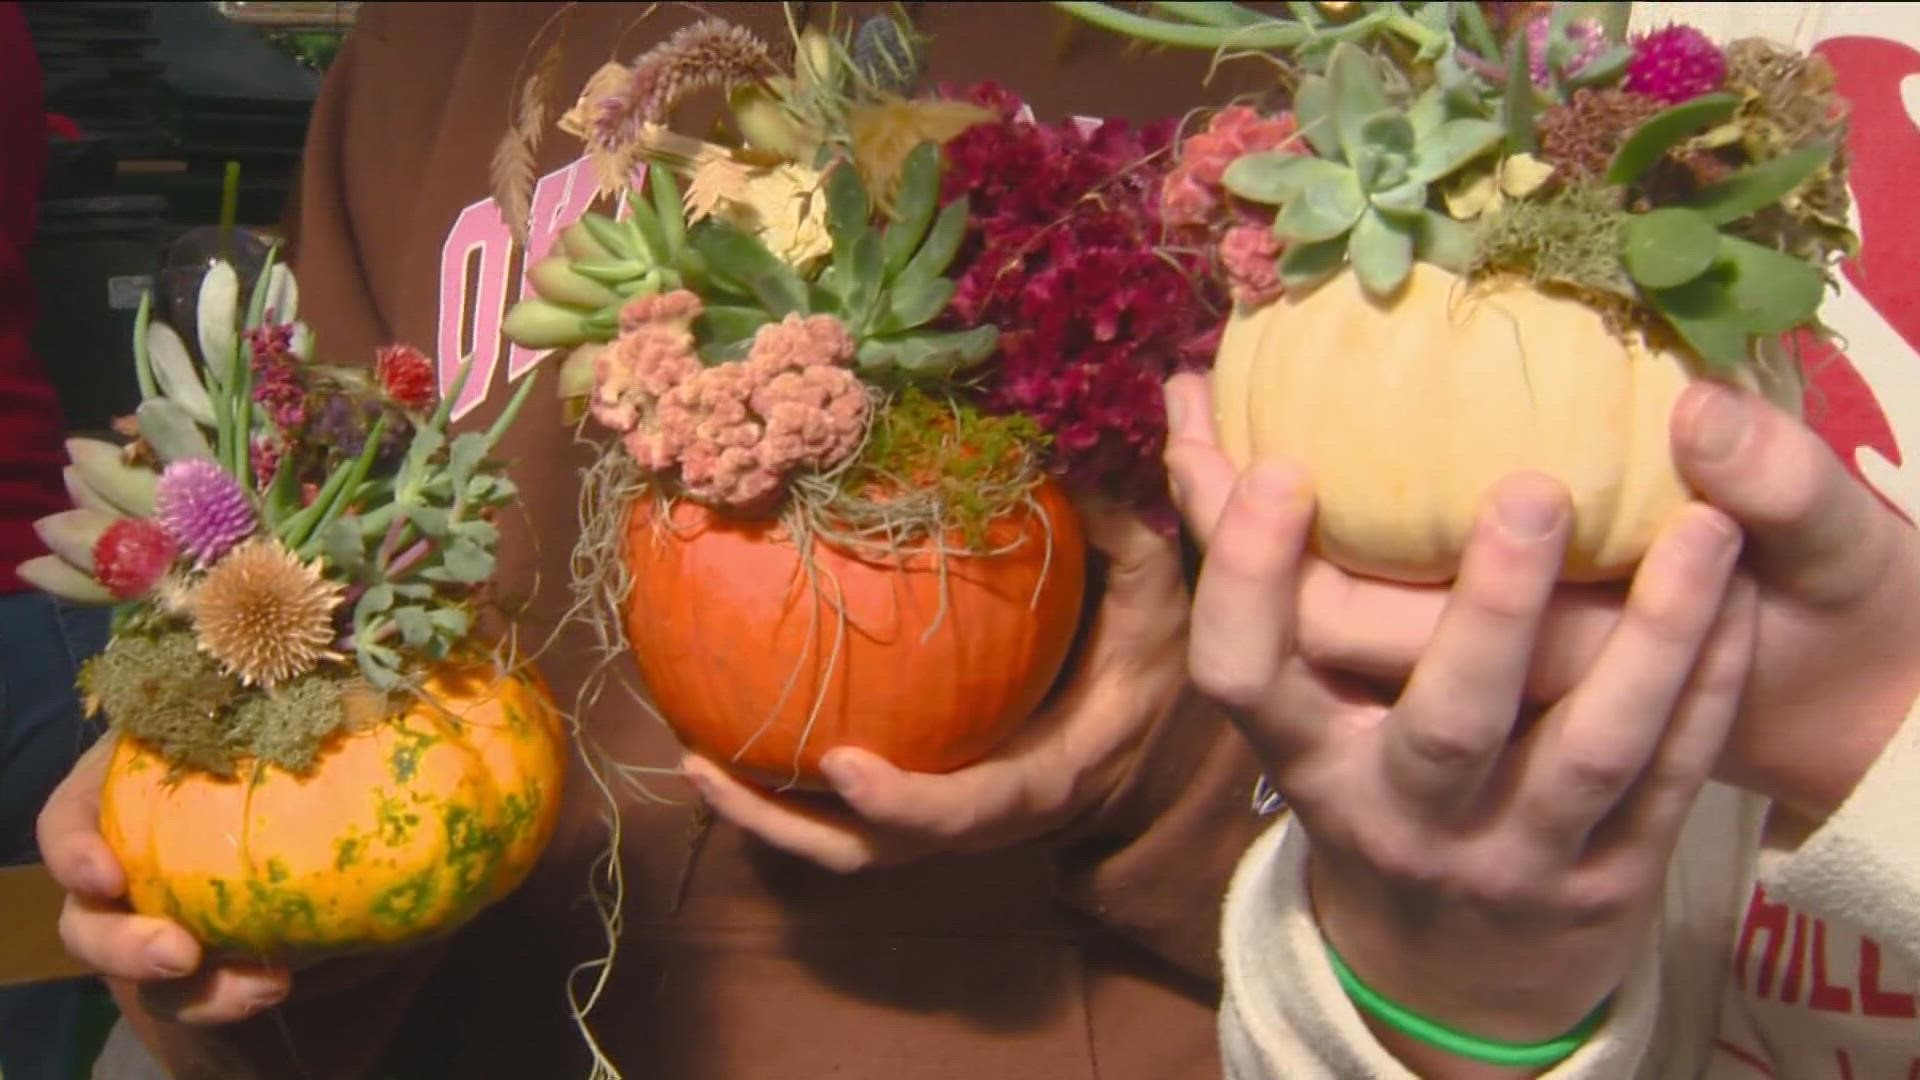 On this episode of 'You Can Grow It', Jim Duthie shows a twist on the Halloween classic; combining small pumpkins with indoor gardening to make unique fall decorum.